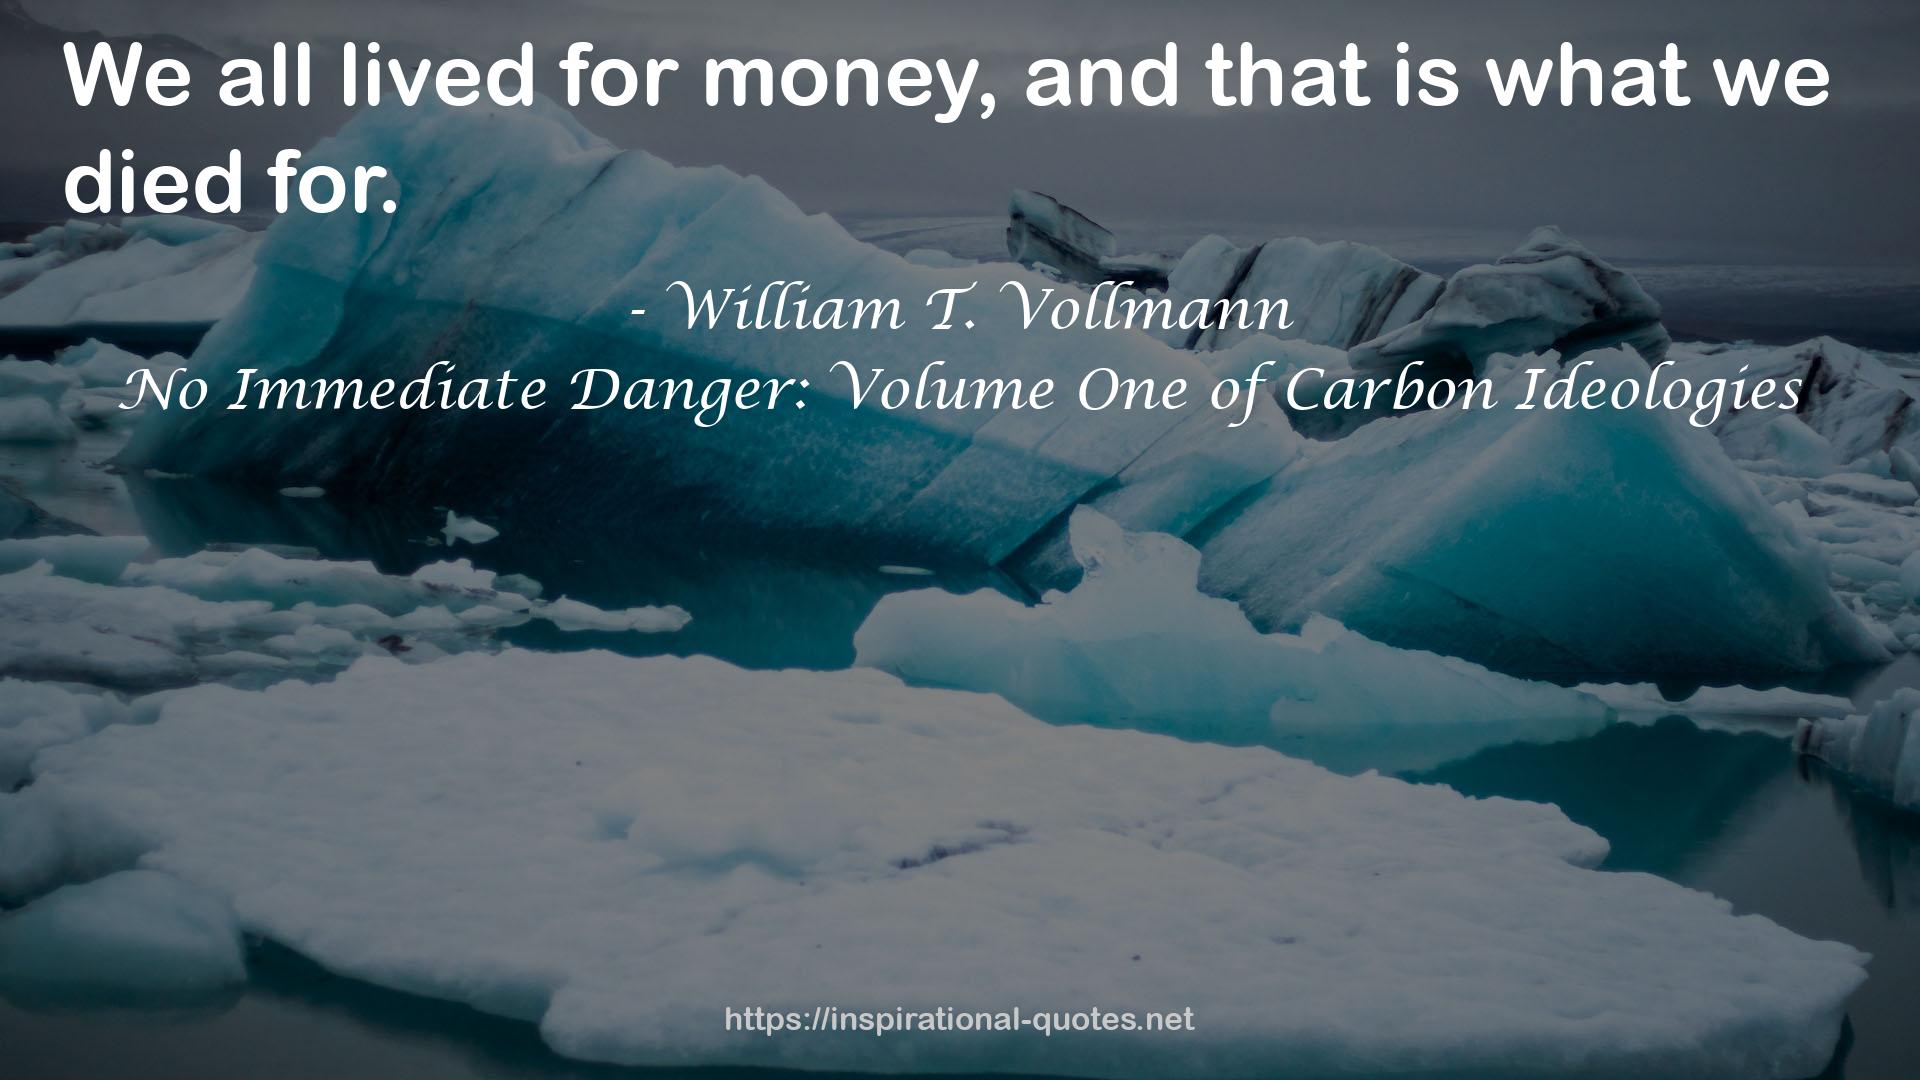 No Immediate Danger: Volume One of Carbon Ideologies QUOTES